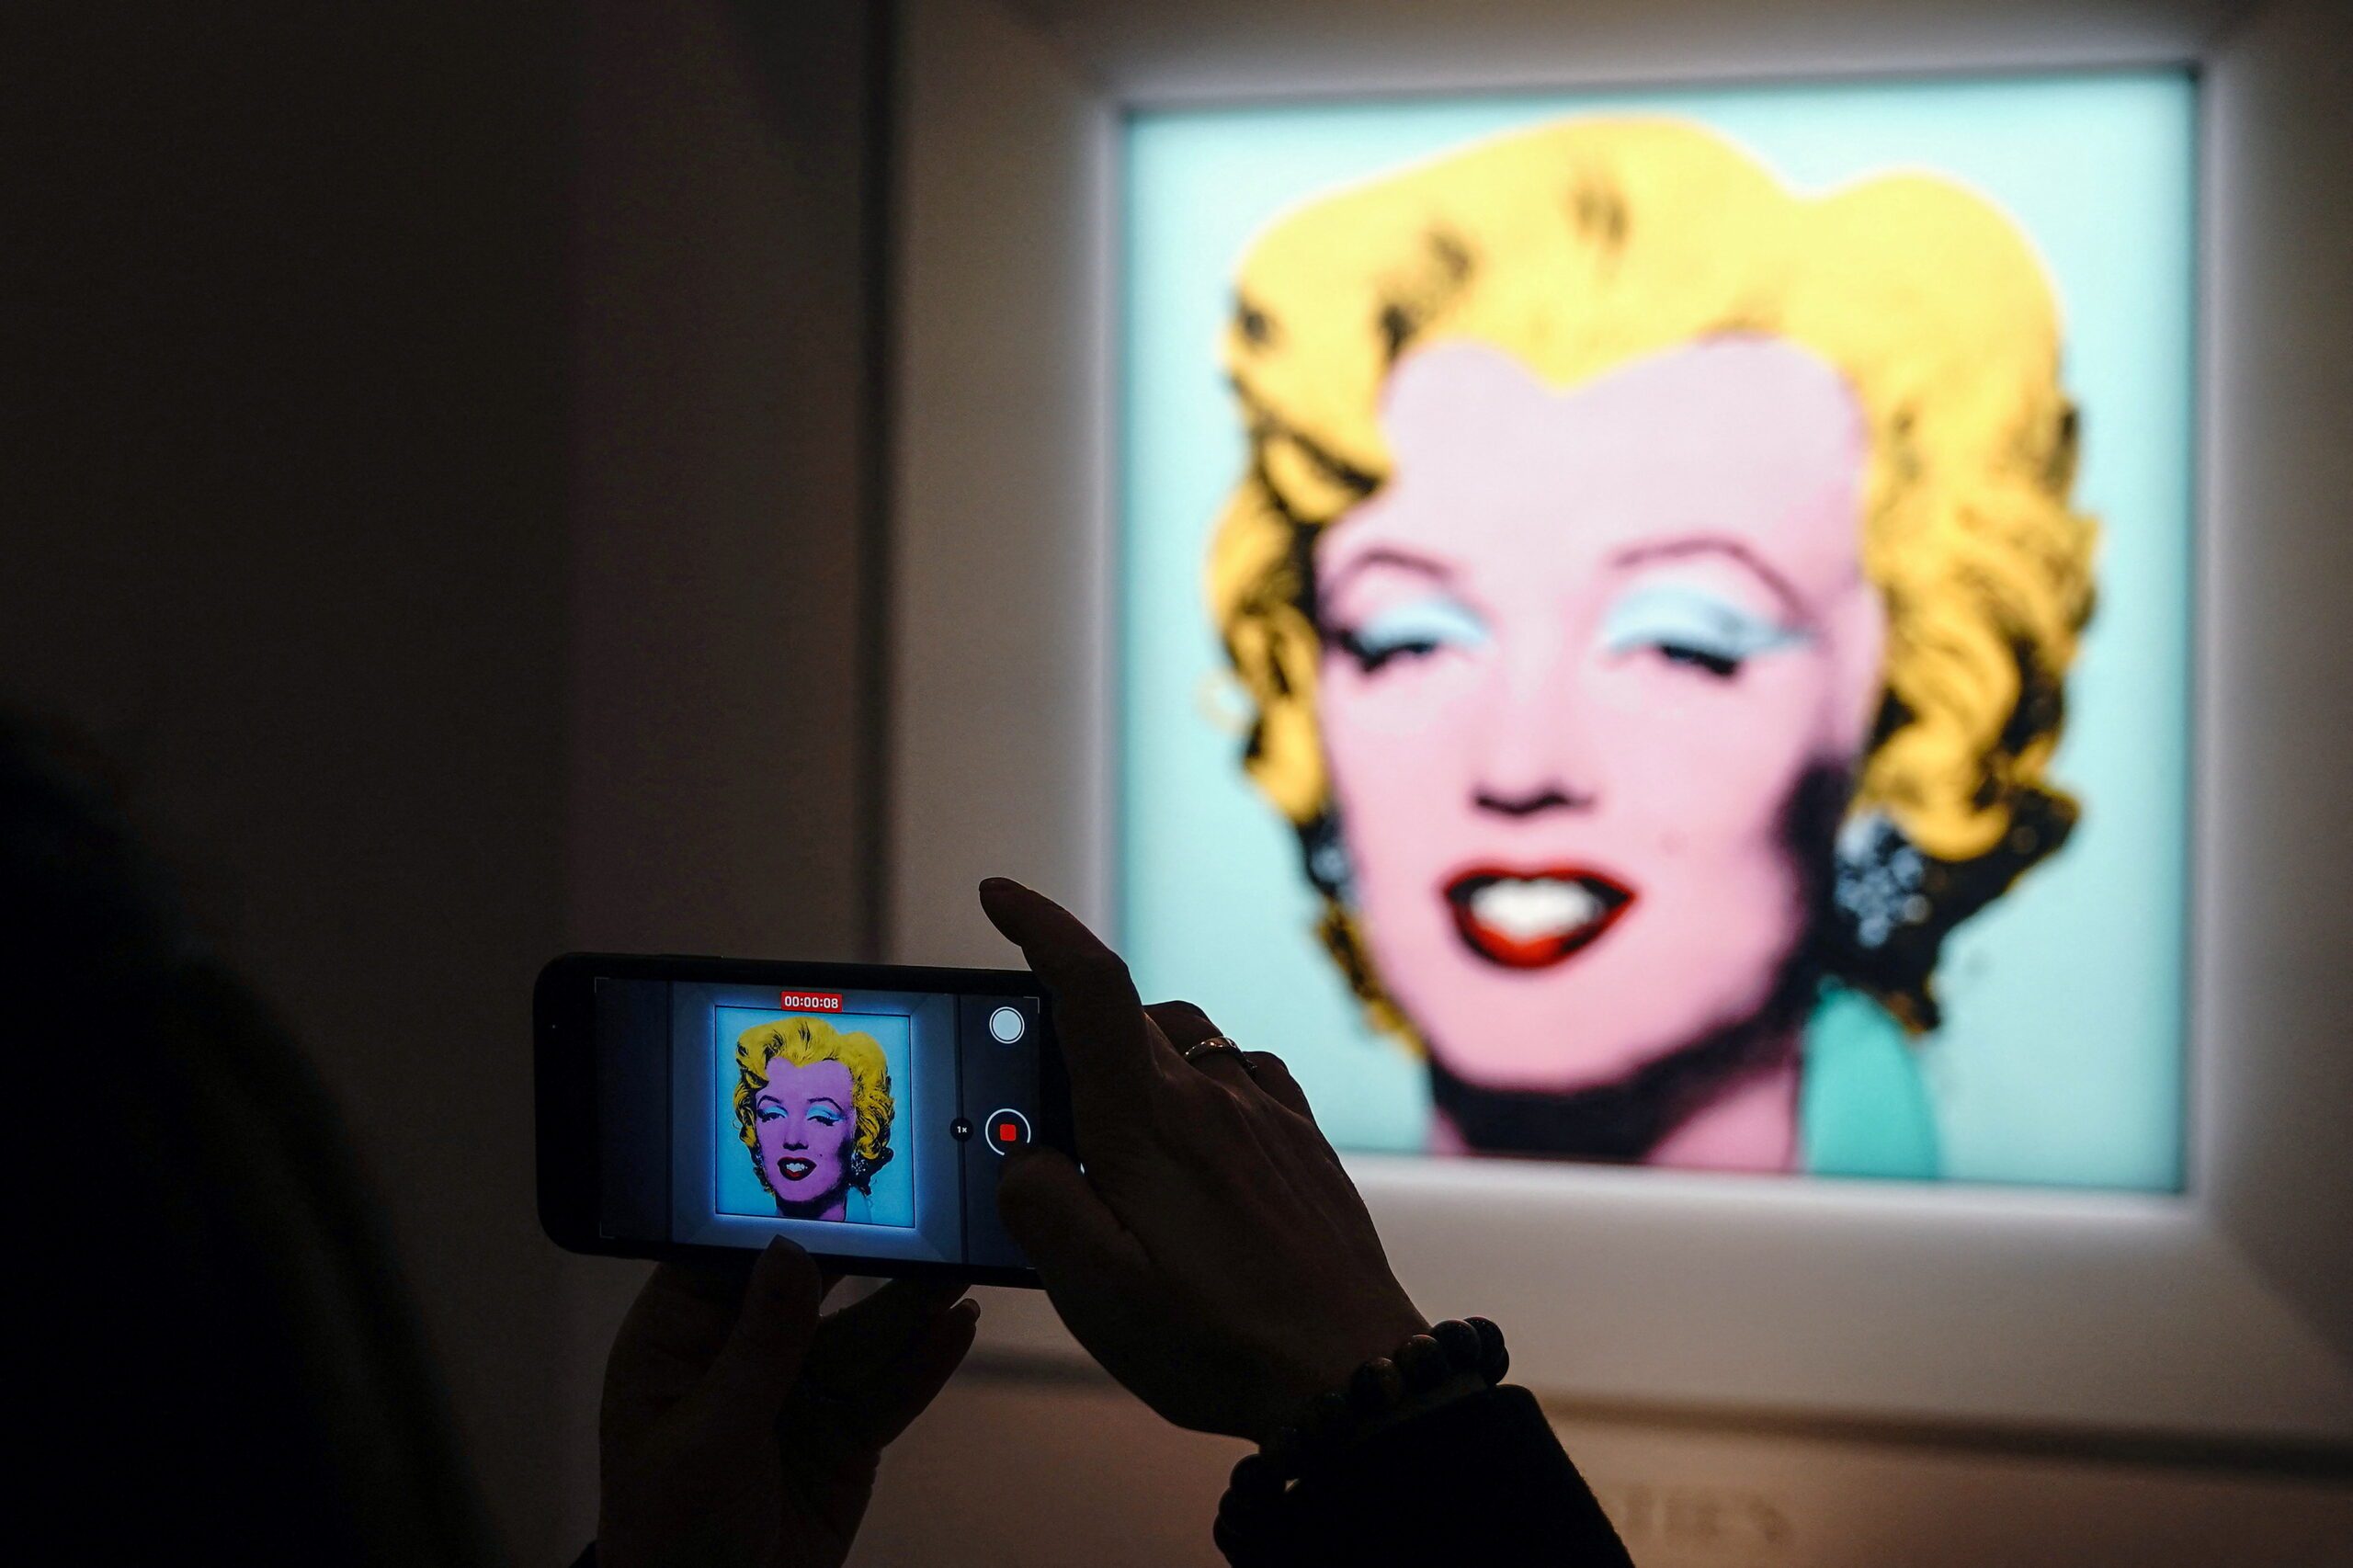 Warhol painting of Marilyn Monroe expected to fetch $200 million at auction